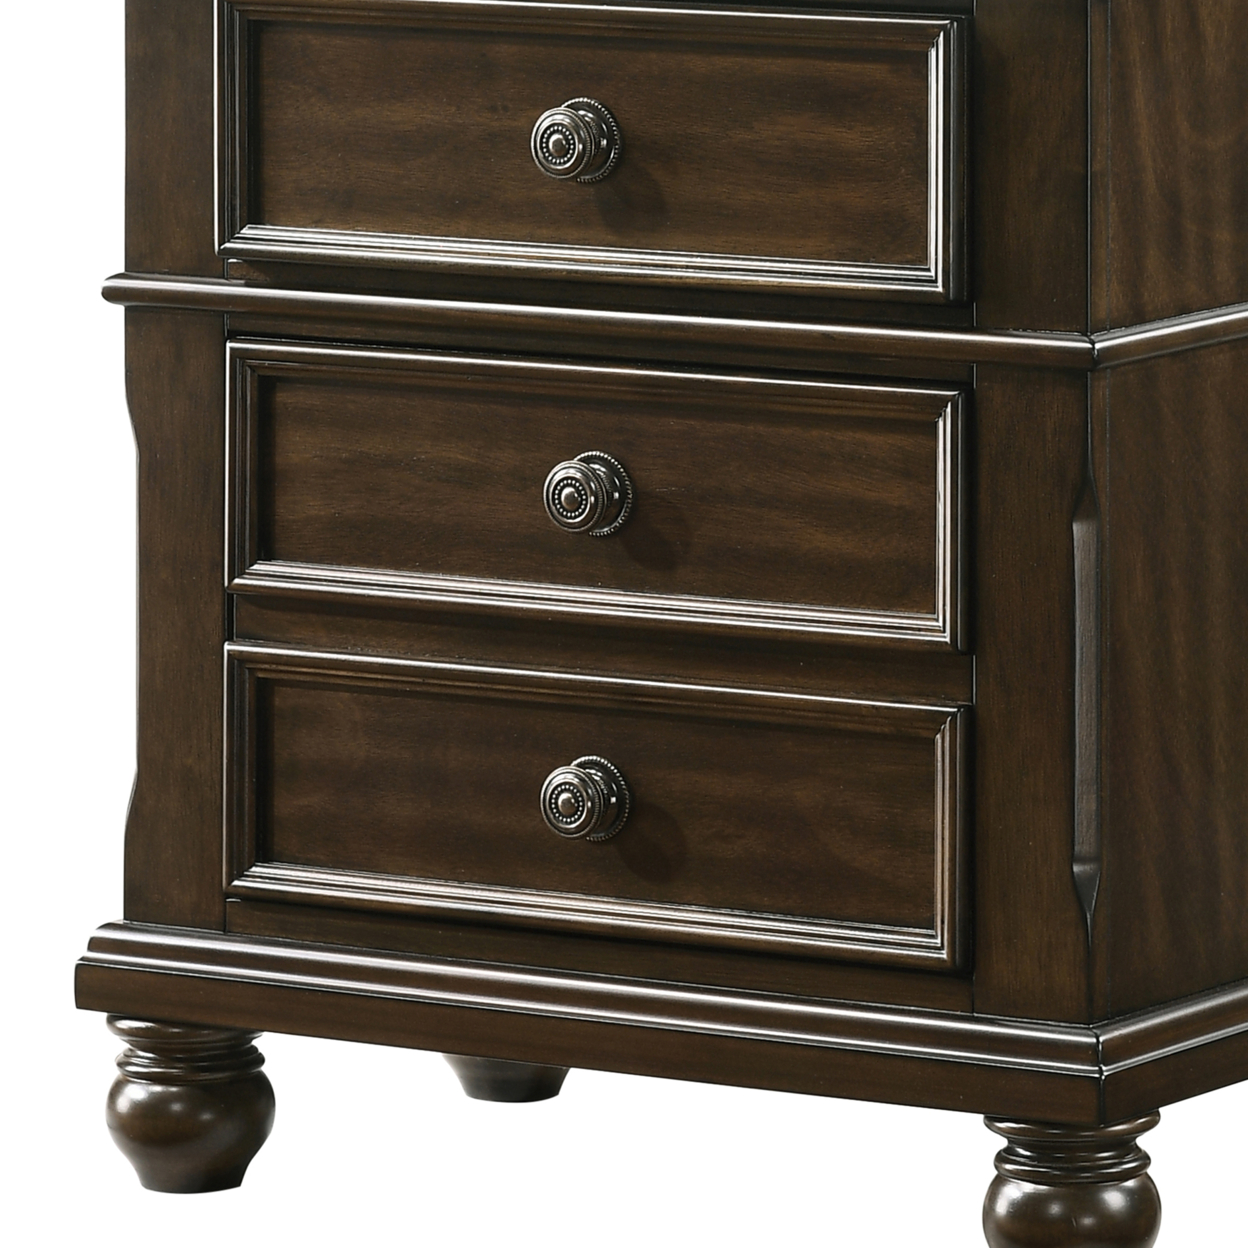 3 Drawer Wooden Nightstand With Molded Details And Metal Knobs, Brown- Saltoro Sherpi